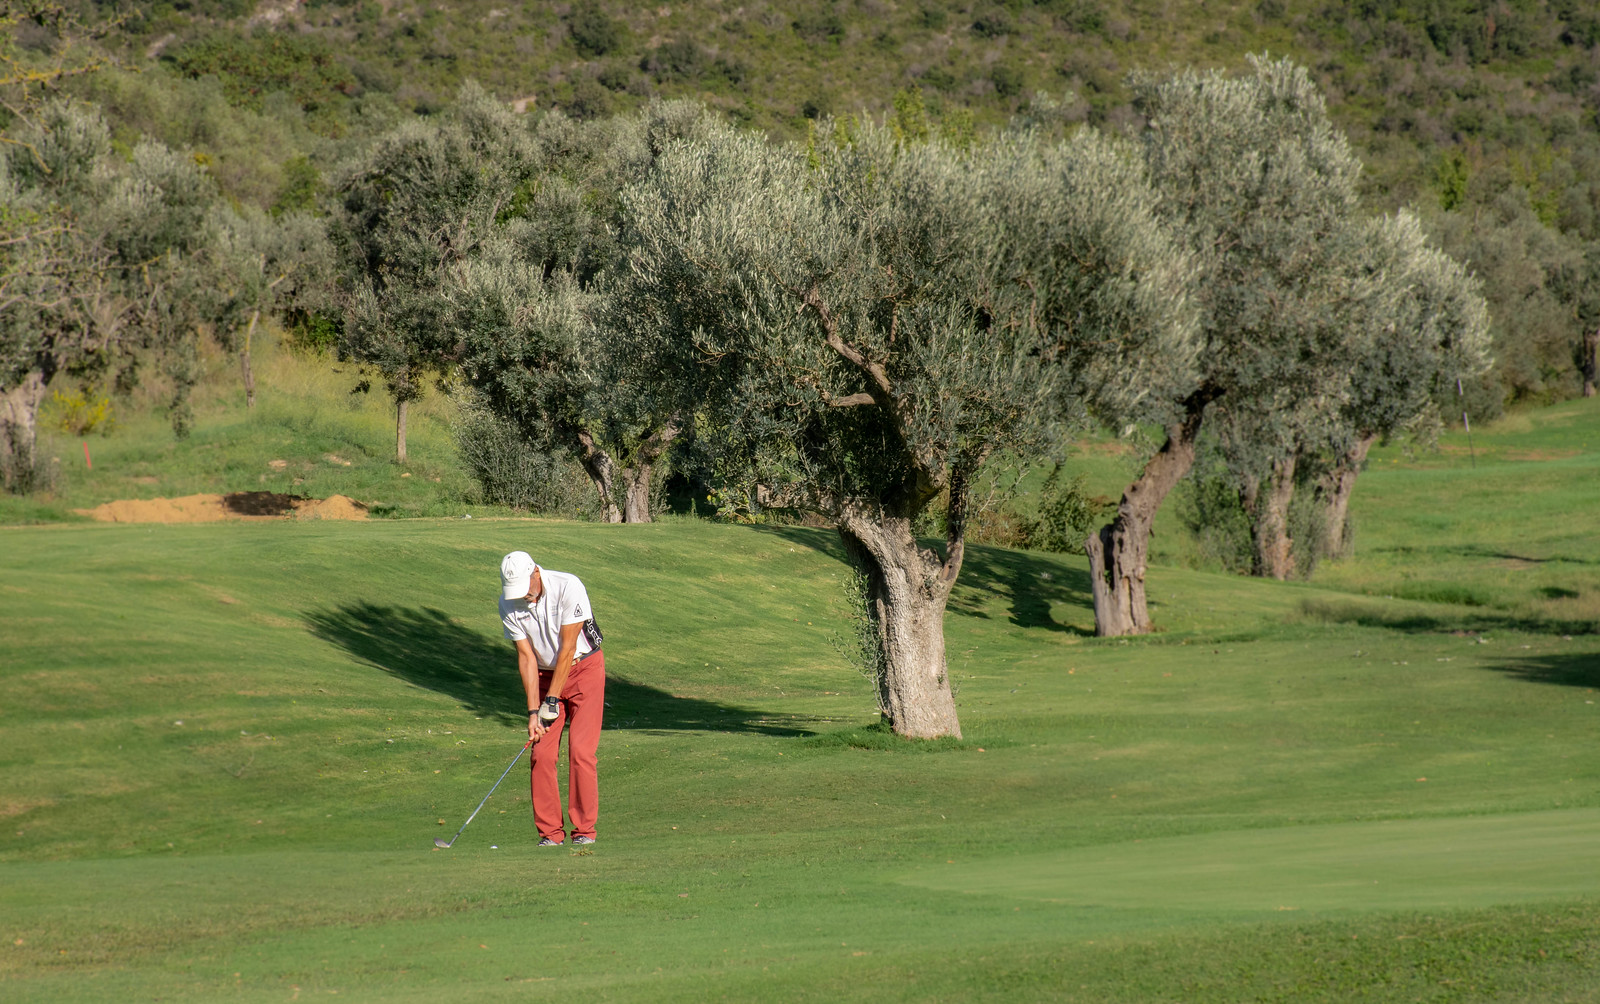 Man play golf with olive trees in the background, Monte Argentario, Tuscany, Italy